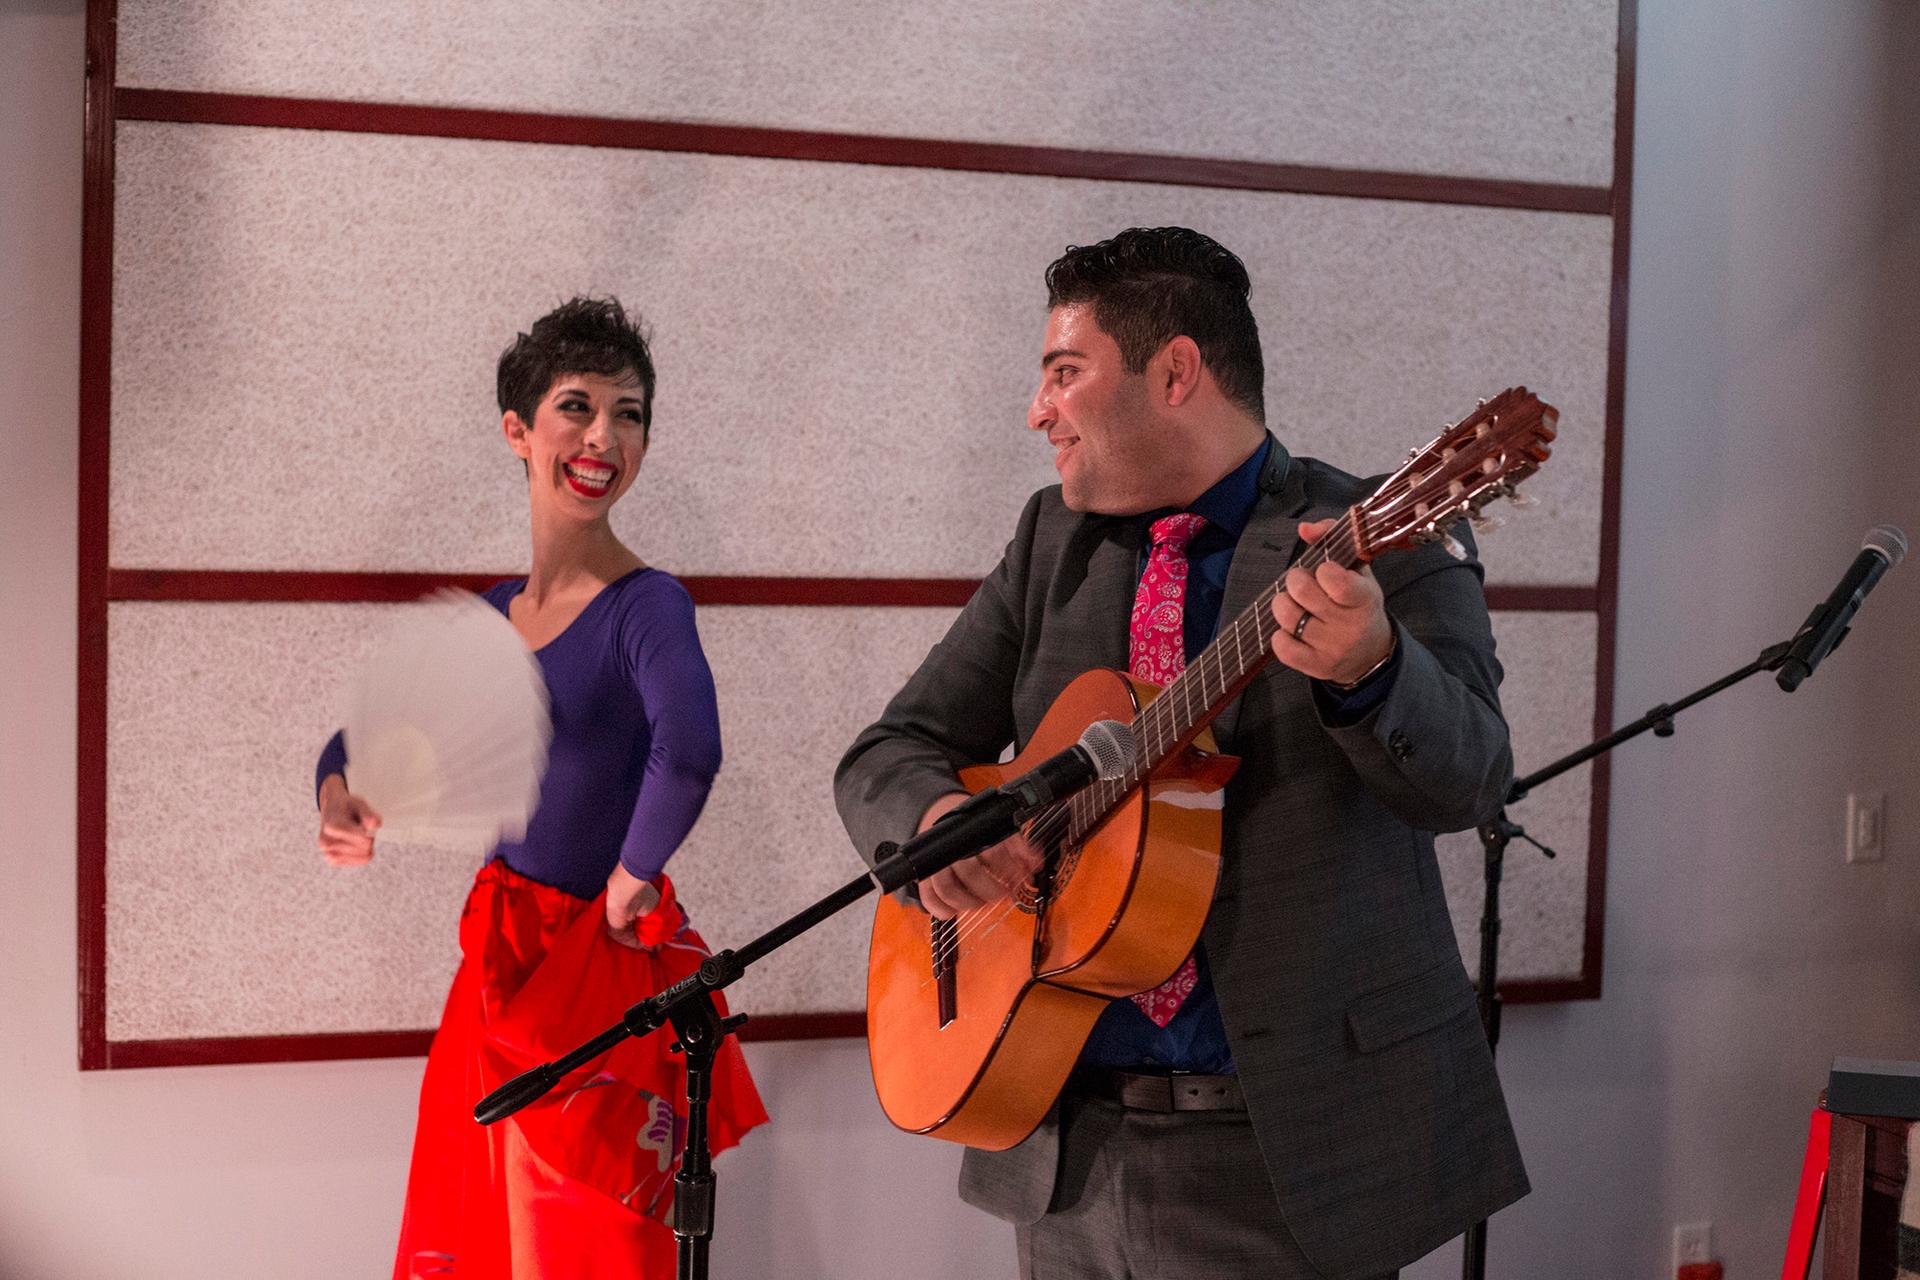 Omar locks eyes with his wife, Jasmín, on stage as violinist Patrick Contreras makes his way offstage and into the crowd during the final number of their performance.